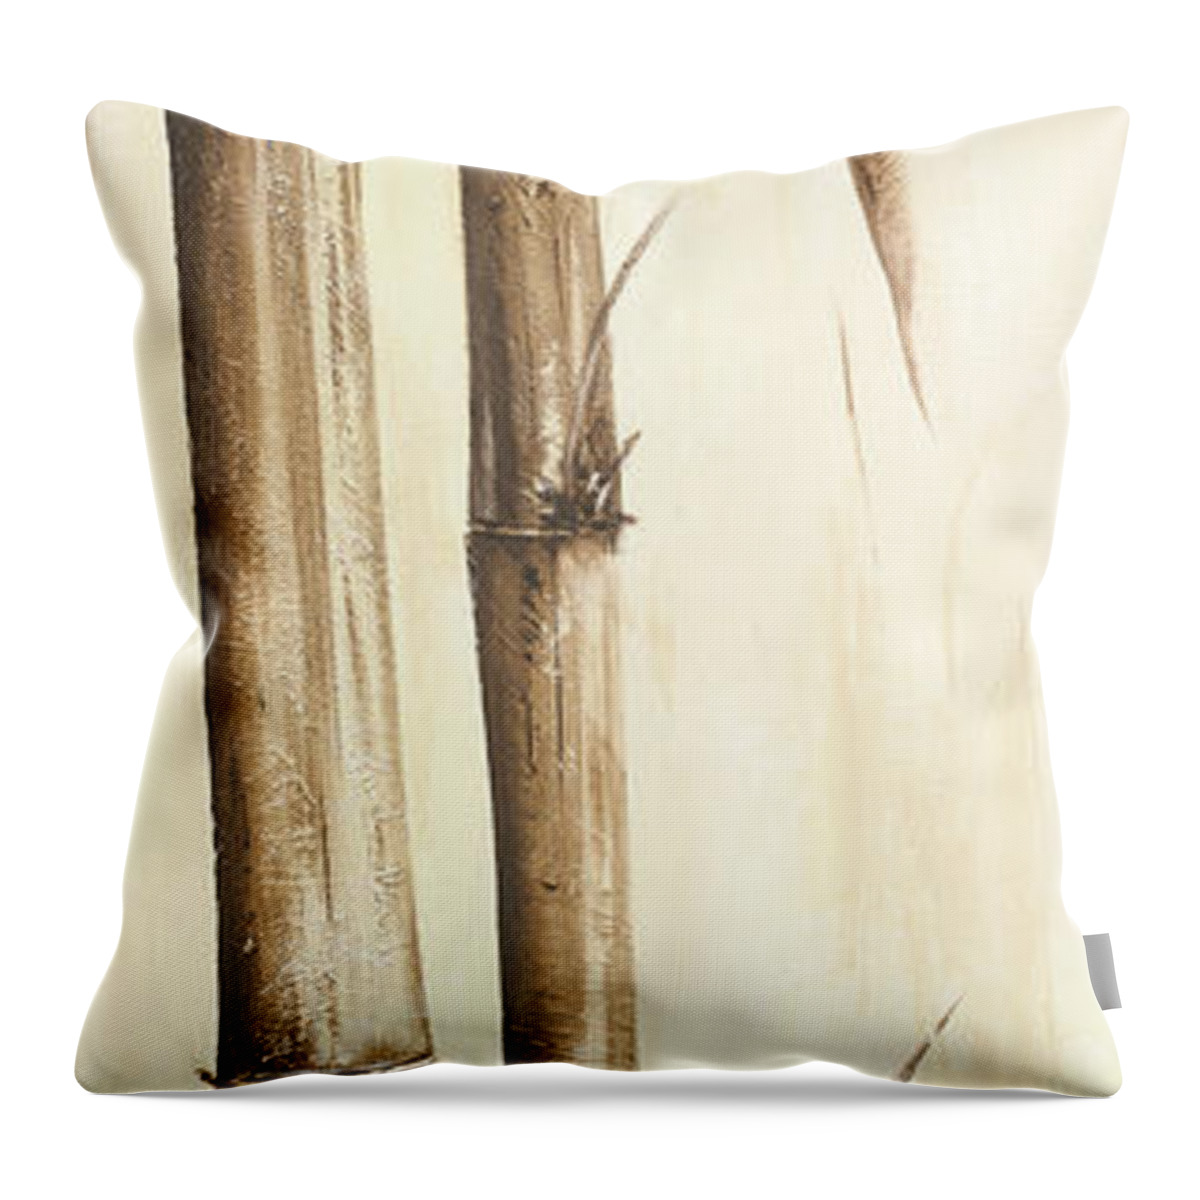 Sepia Throw Pillow featuring the painting Sepia Guadua Bamboo I by Patricia Pinto